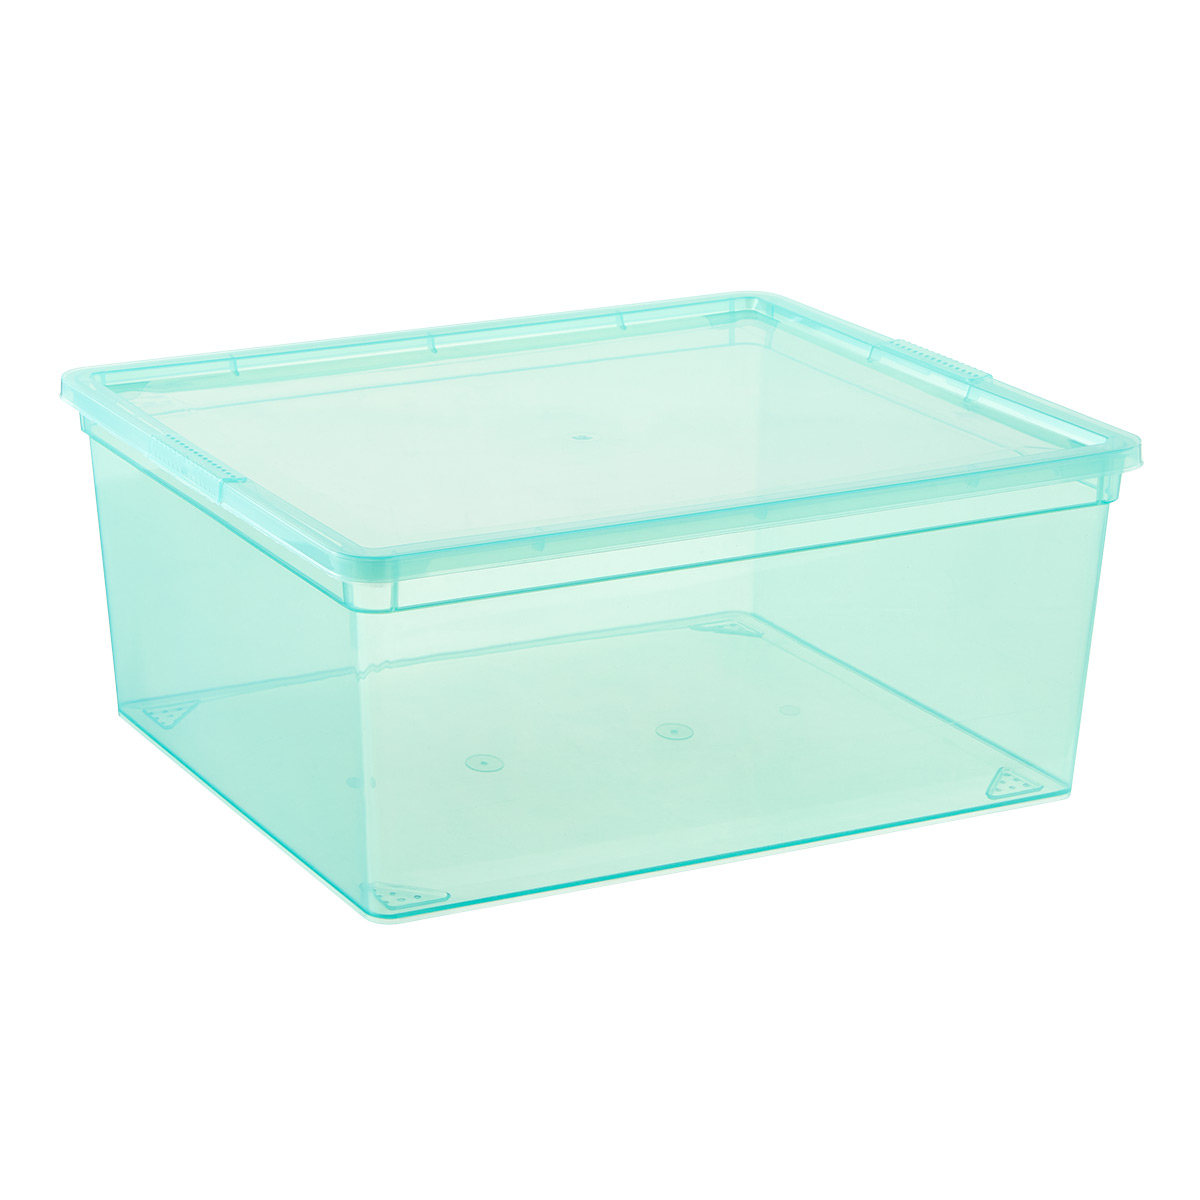 https://images.containerstore.com/catalogimages/434128/10085544_large_our_tidy_box_aqua.jpg